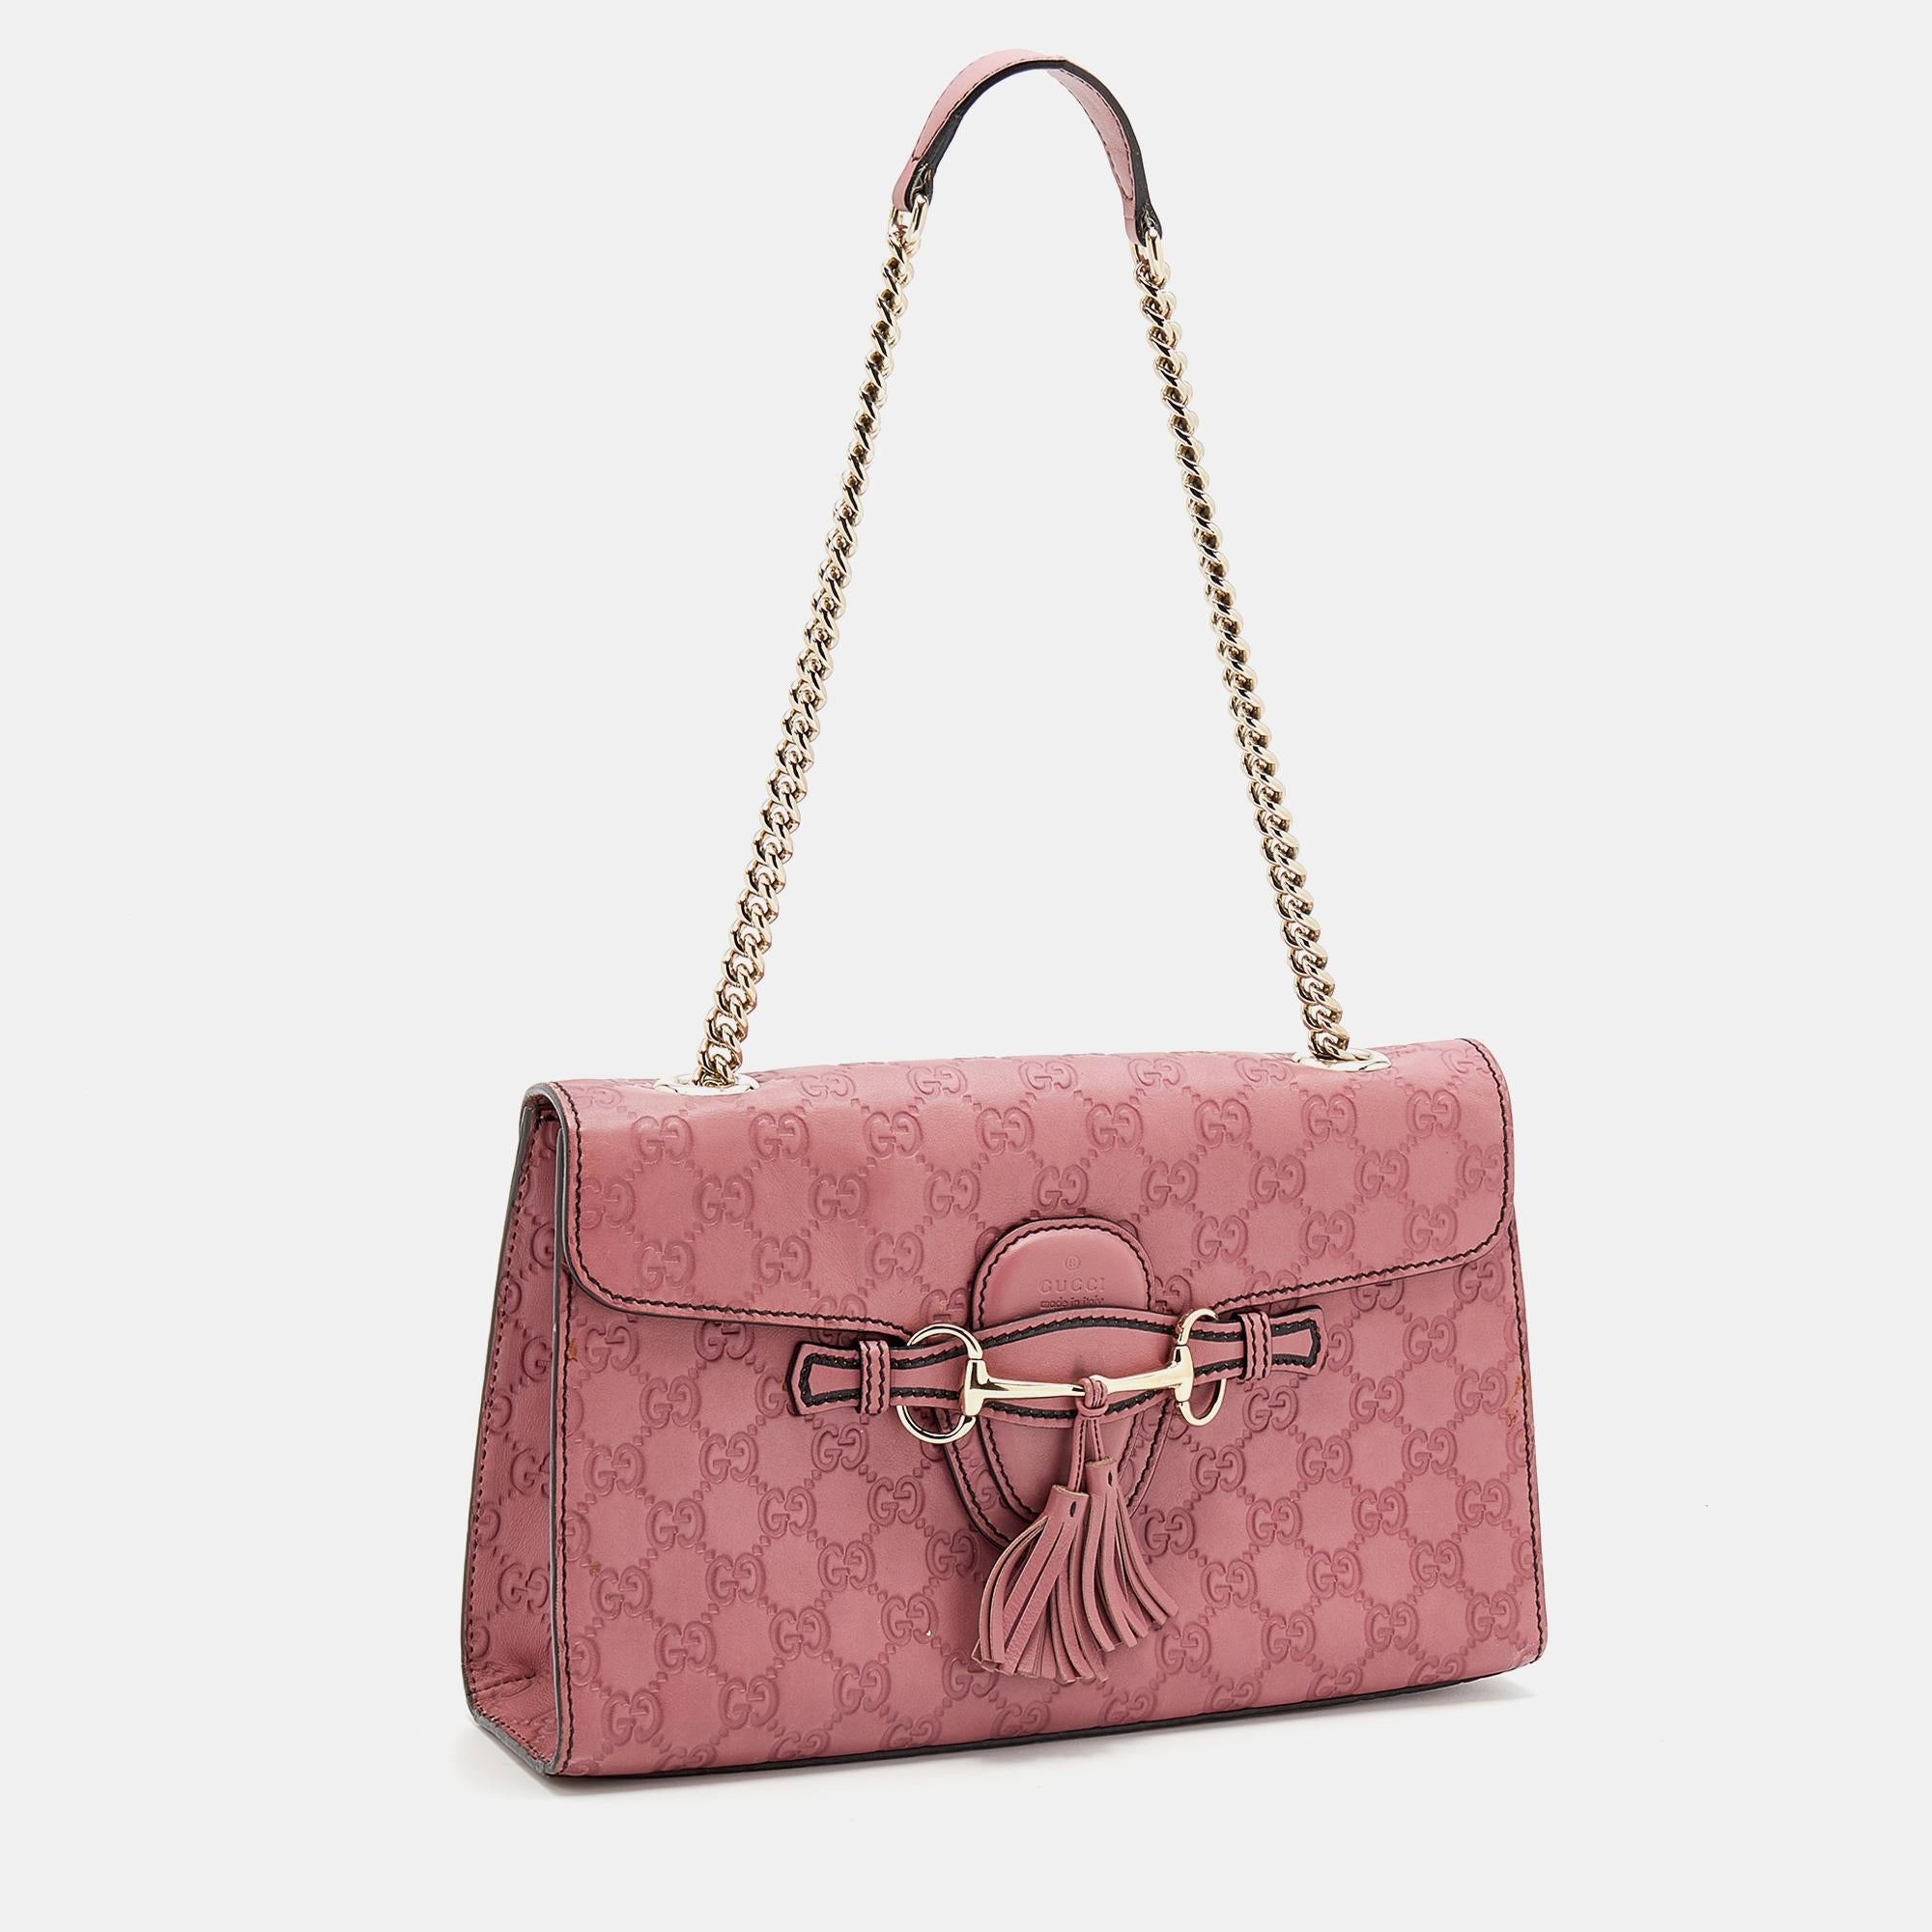 gucci pink pouch